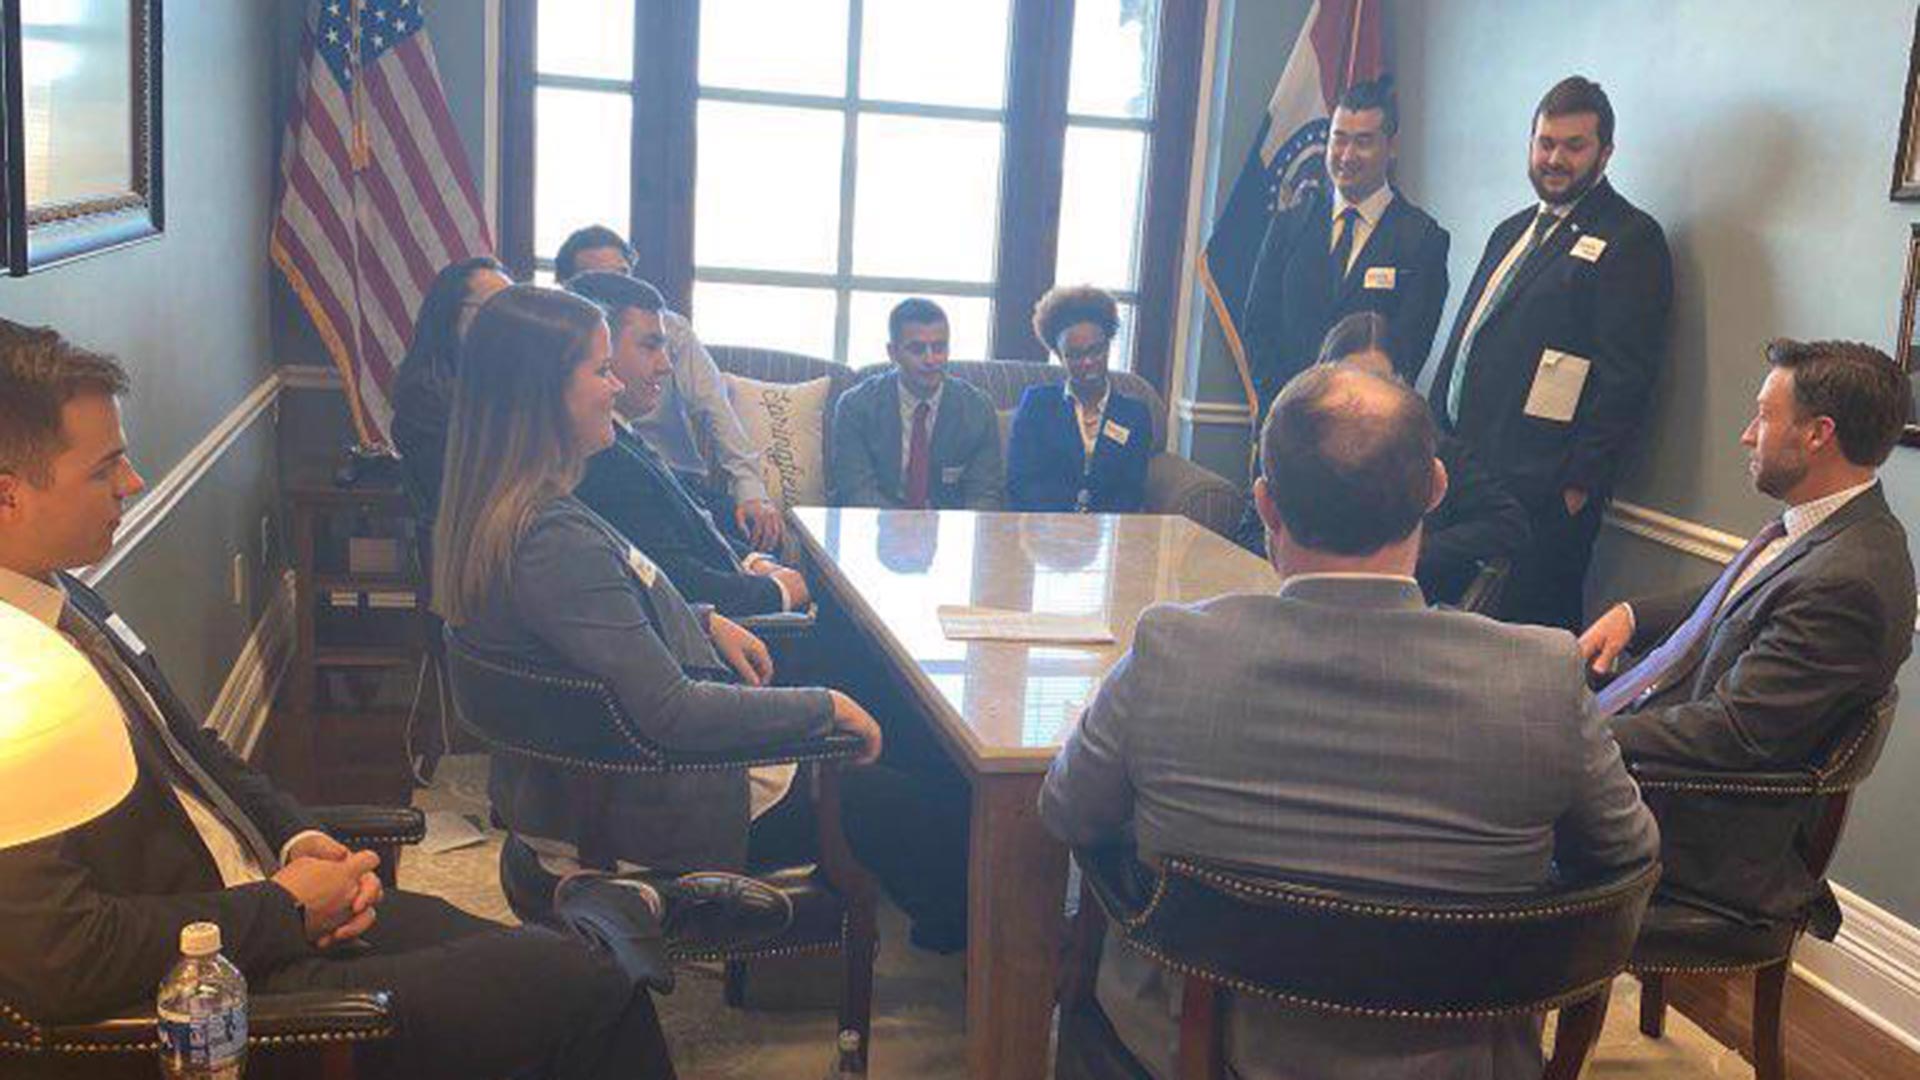 Athletic training students meeting with state legislators in Jefferson City.